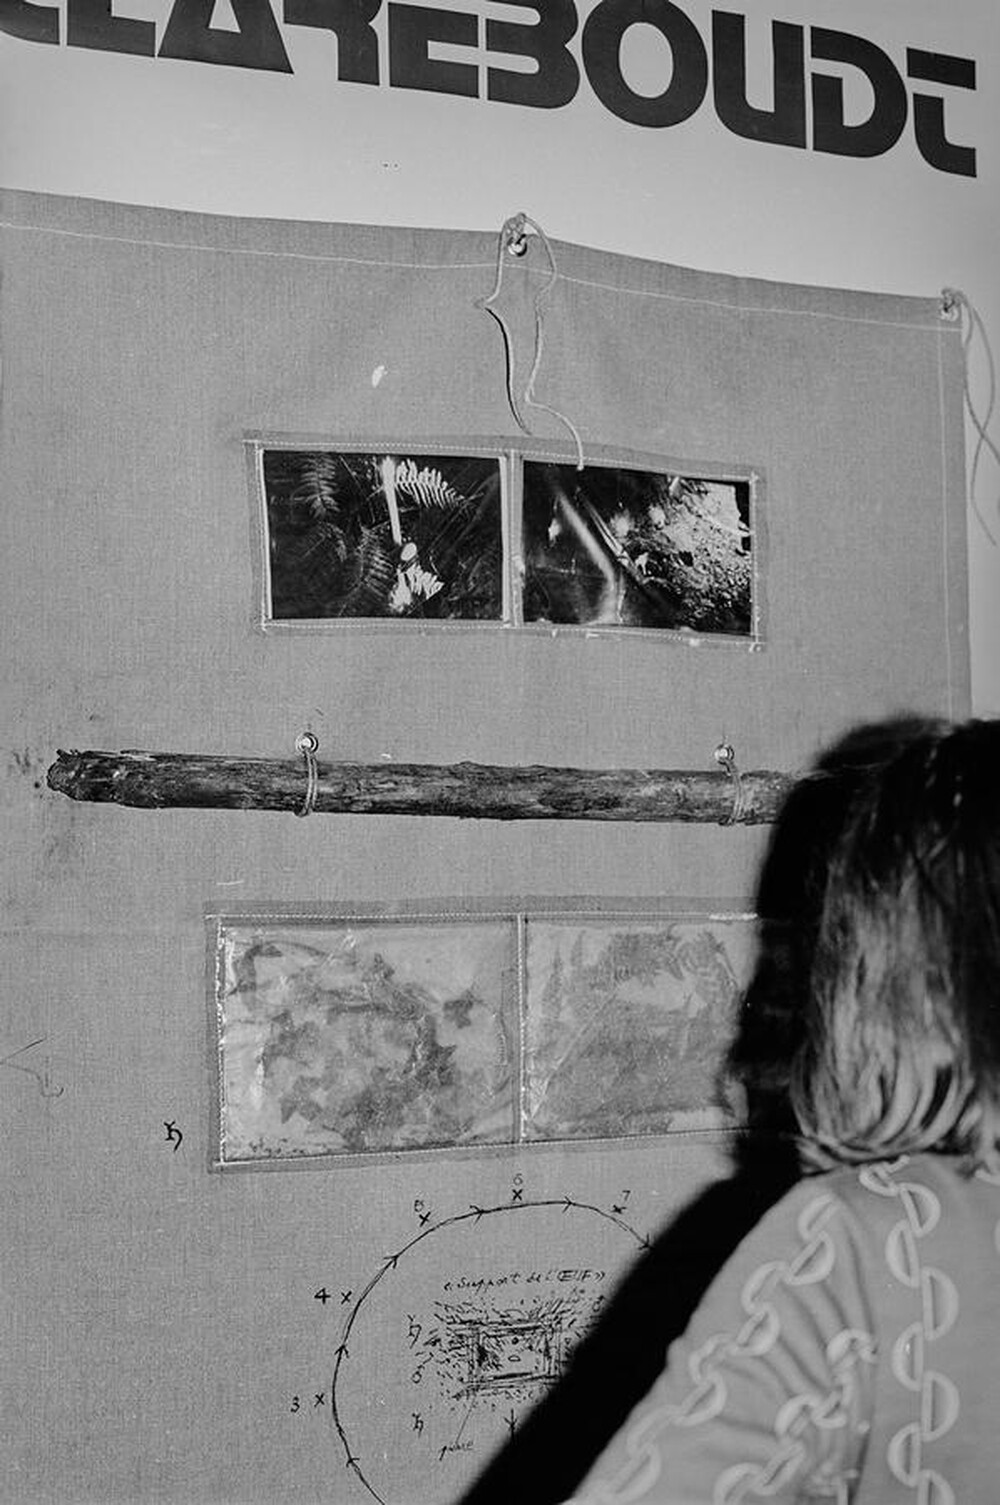 Exhibition "Forms of Artistic Activity", Współczesna Gallery, Warsaw, 1970s